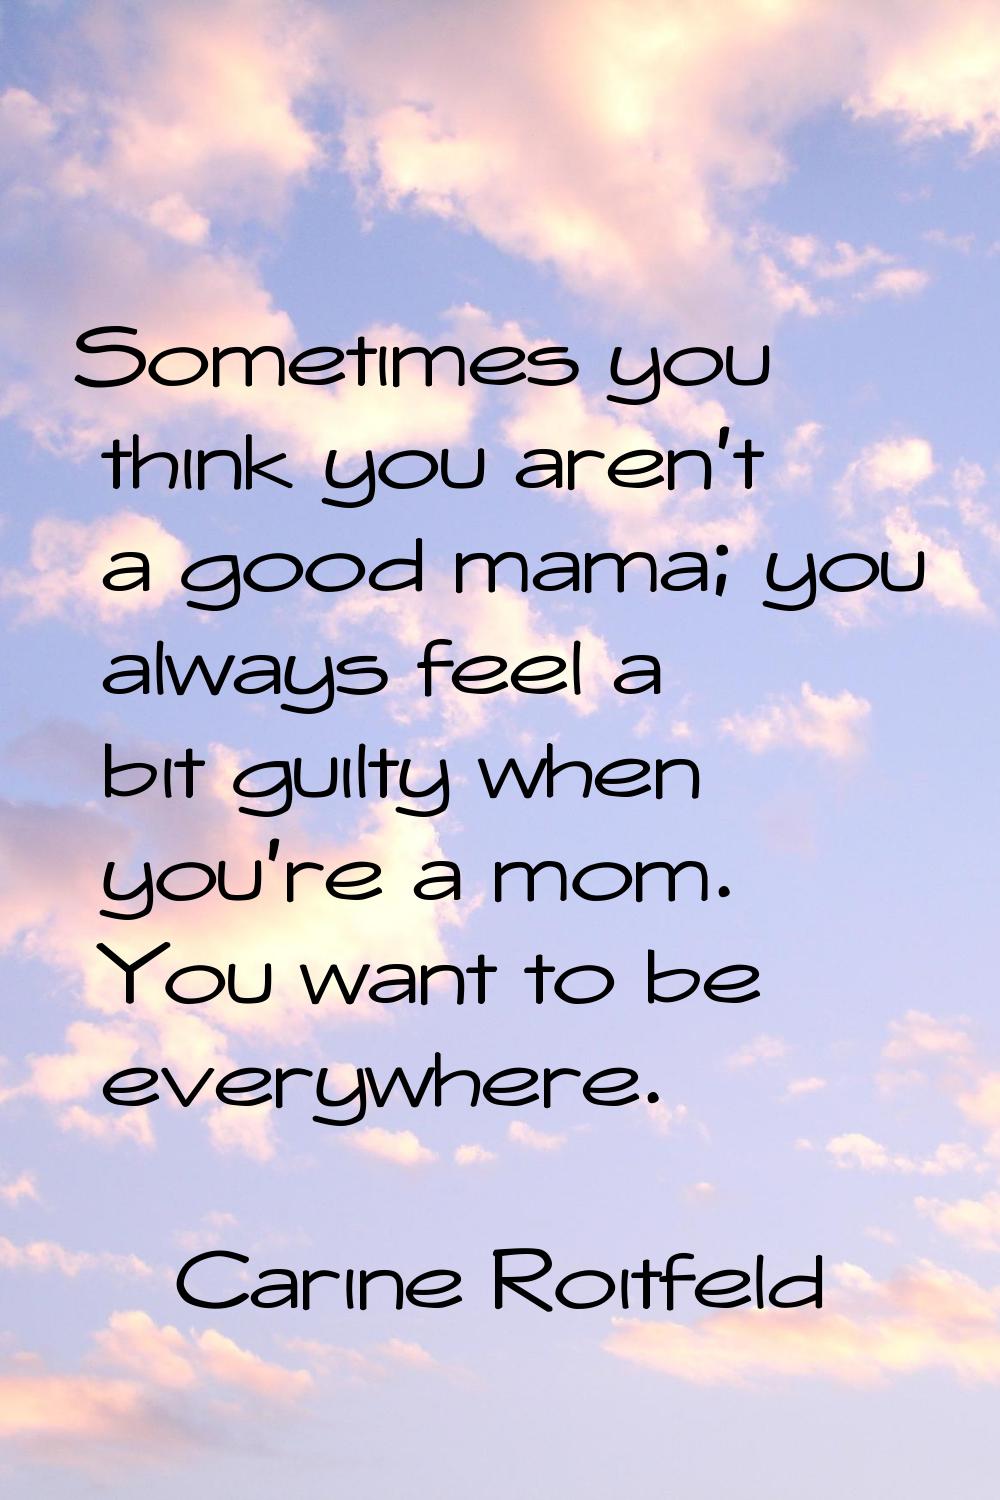 Sometimes you think you aren't a good mama; you always feel a bit guilty when you're a mom. You wan